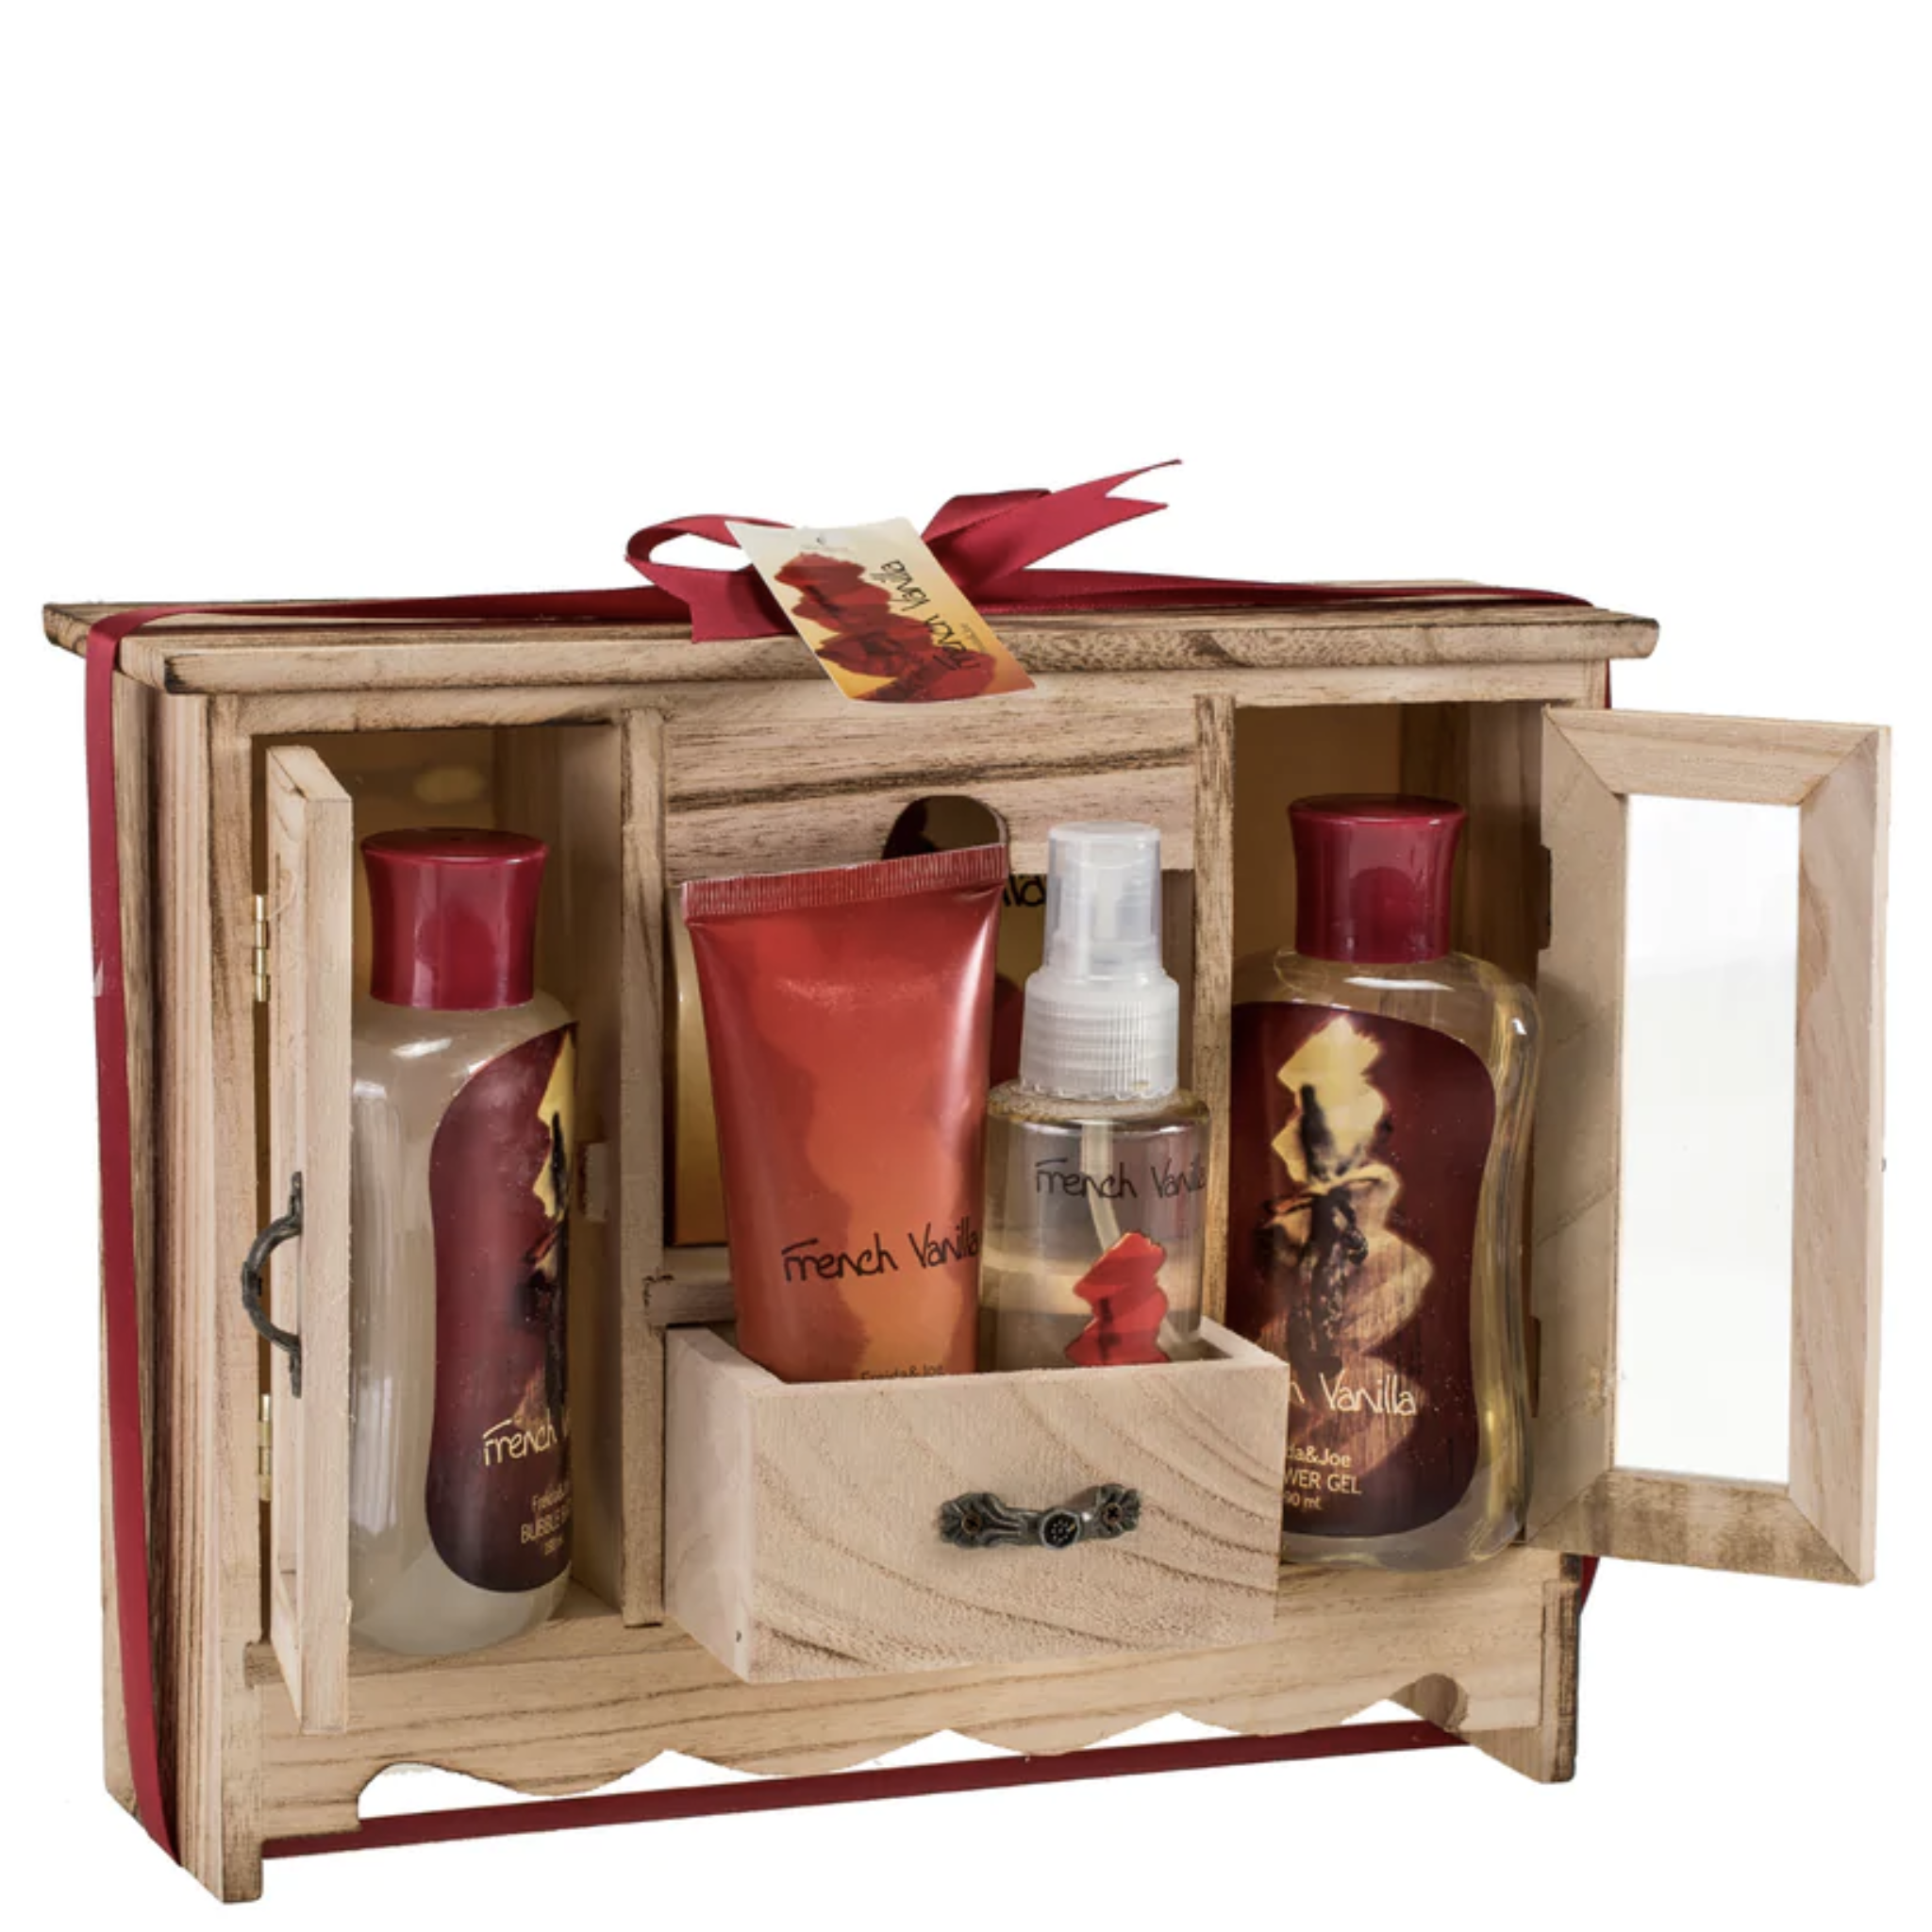 French Vanilla Spa Bath Gift Set in Natural Wood Curio With Refreshing Skin Care Products